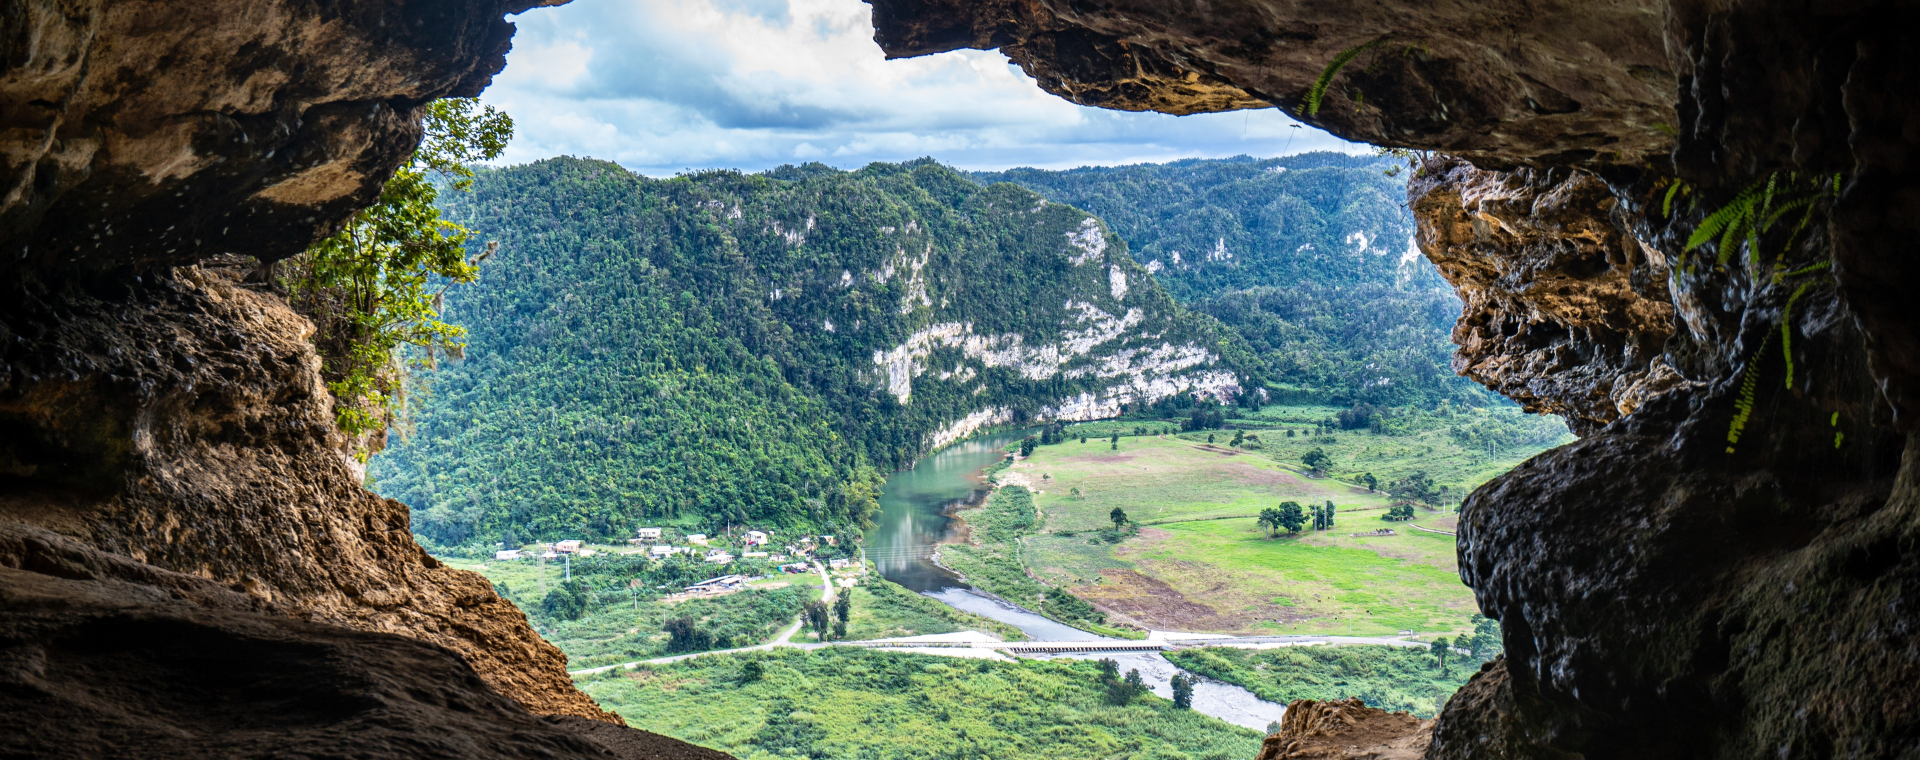 A cave with a view of a river and mountains.